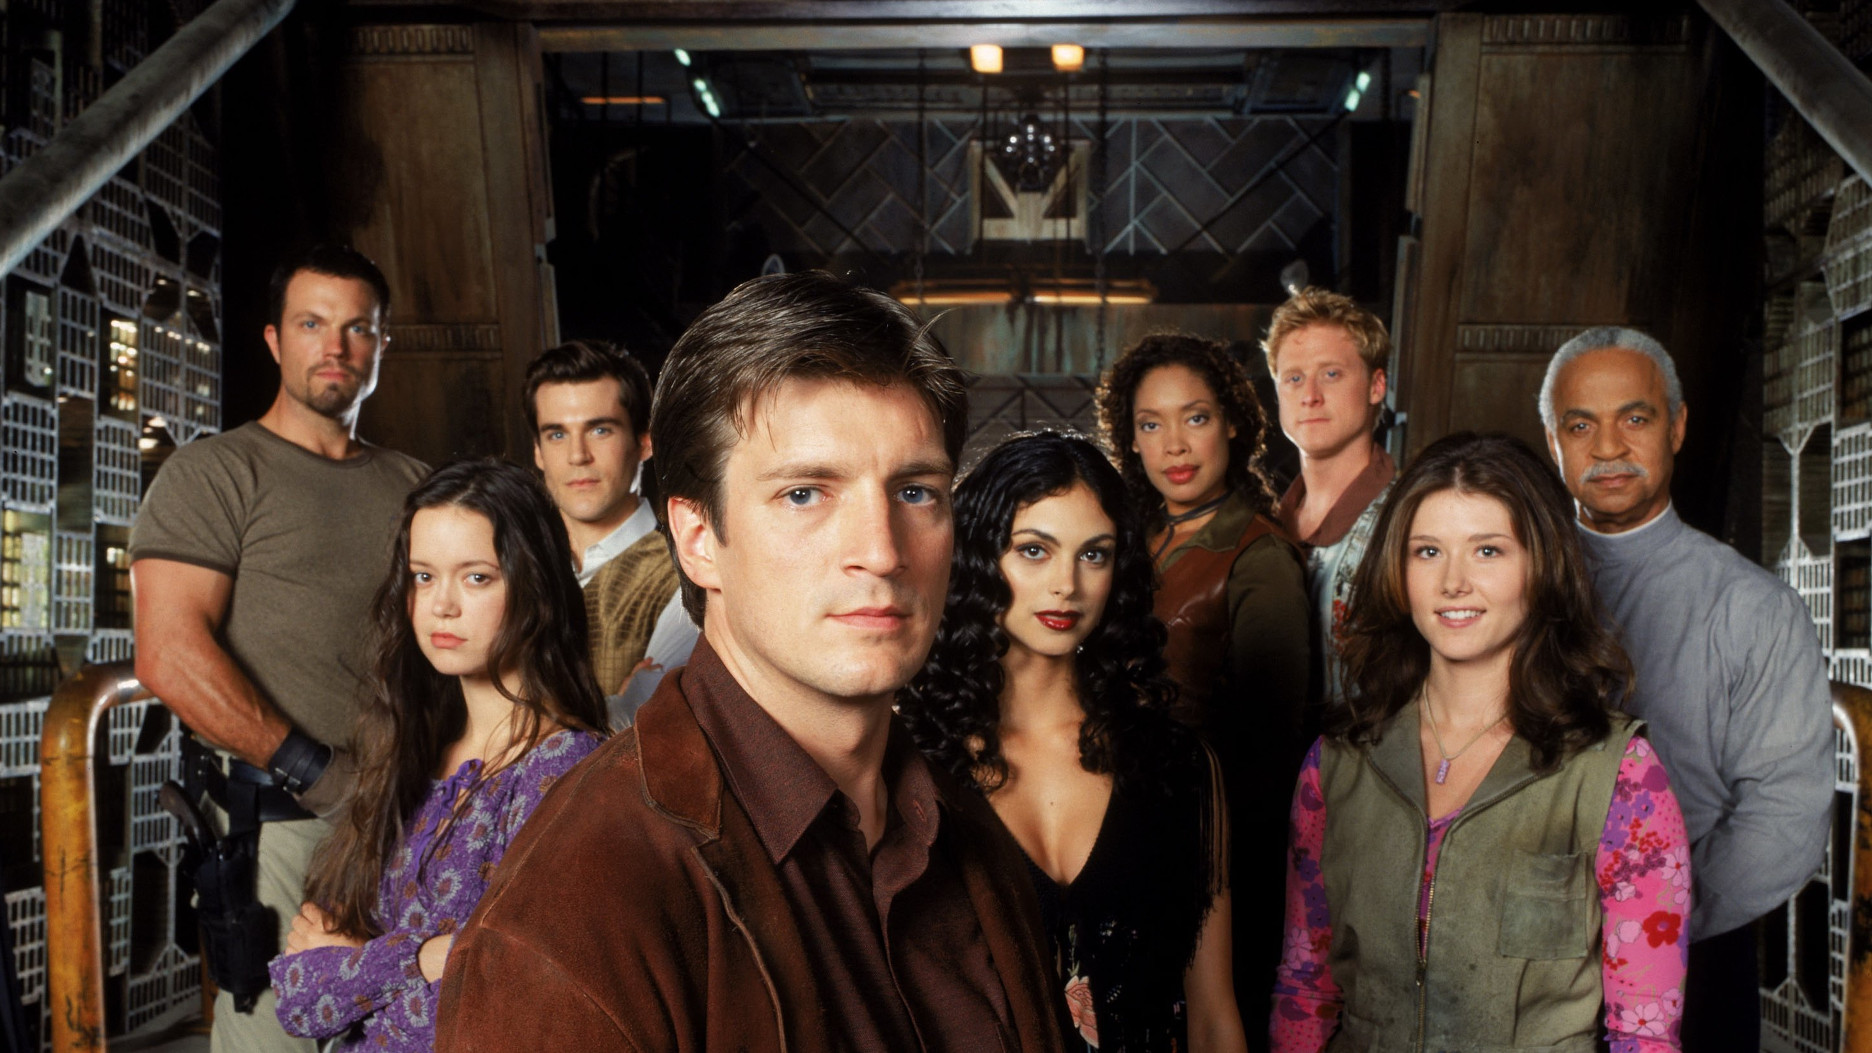 Adam Baldwin, Nathan Fillion, Ron Glass, Sean Maher, Jewel Staite, Gina Torres, Alan Tudyk, Morena Baccarin, and Summer Glau in Firefly (2002)_Universal Pictures